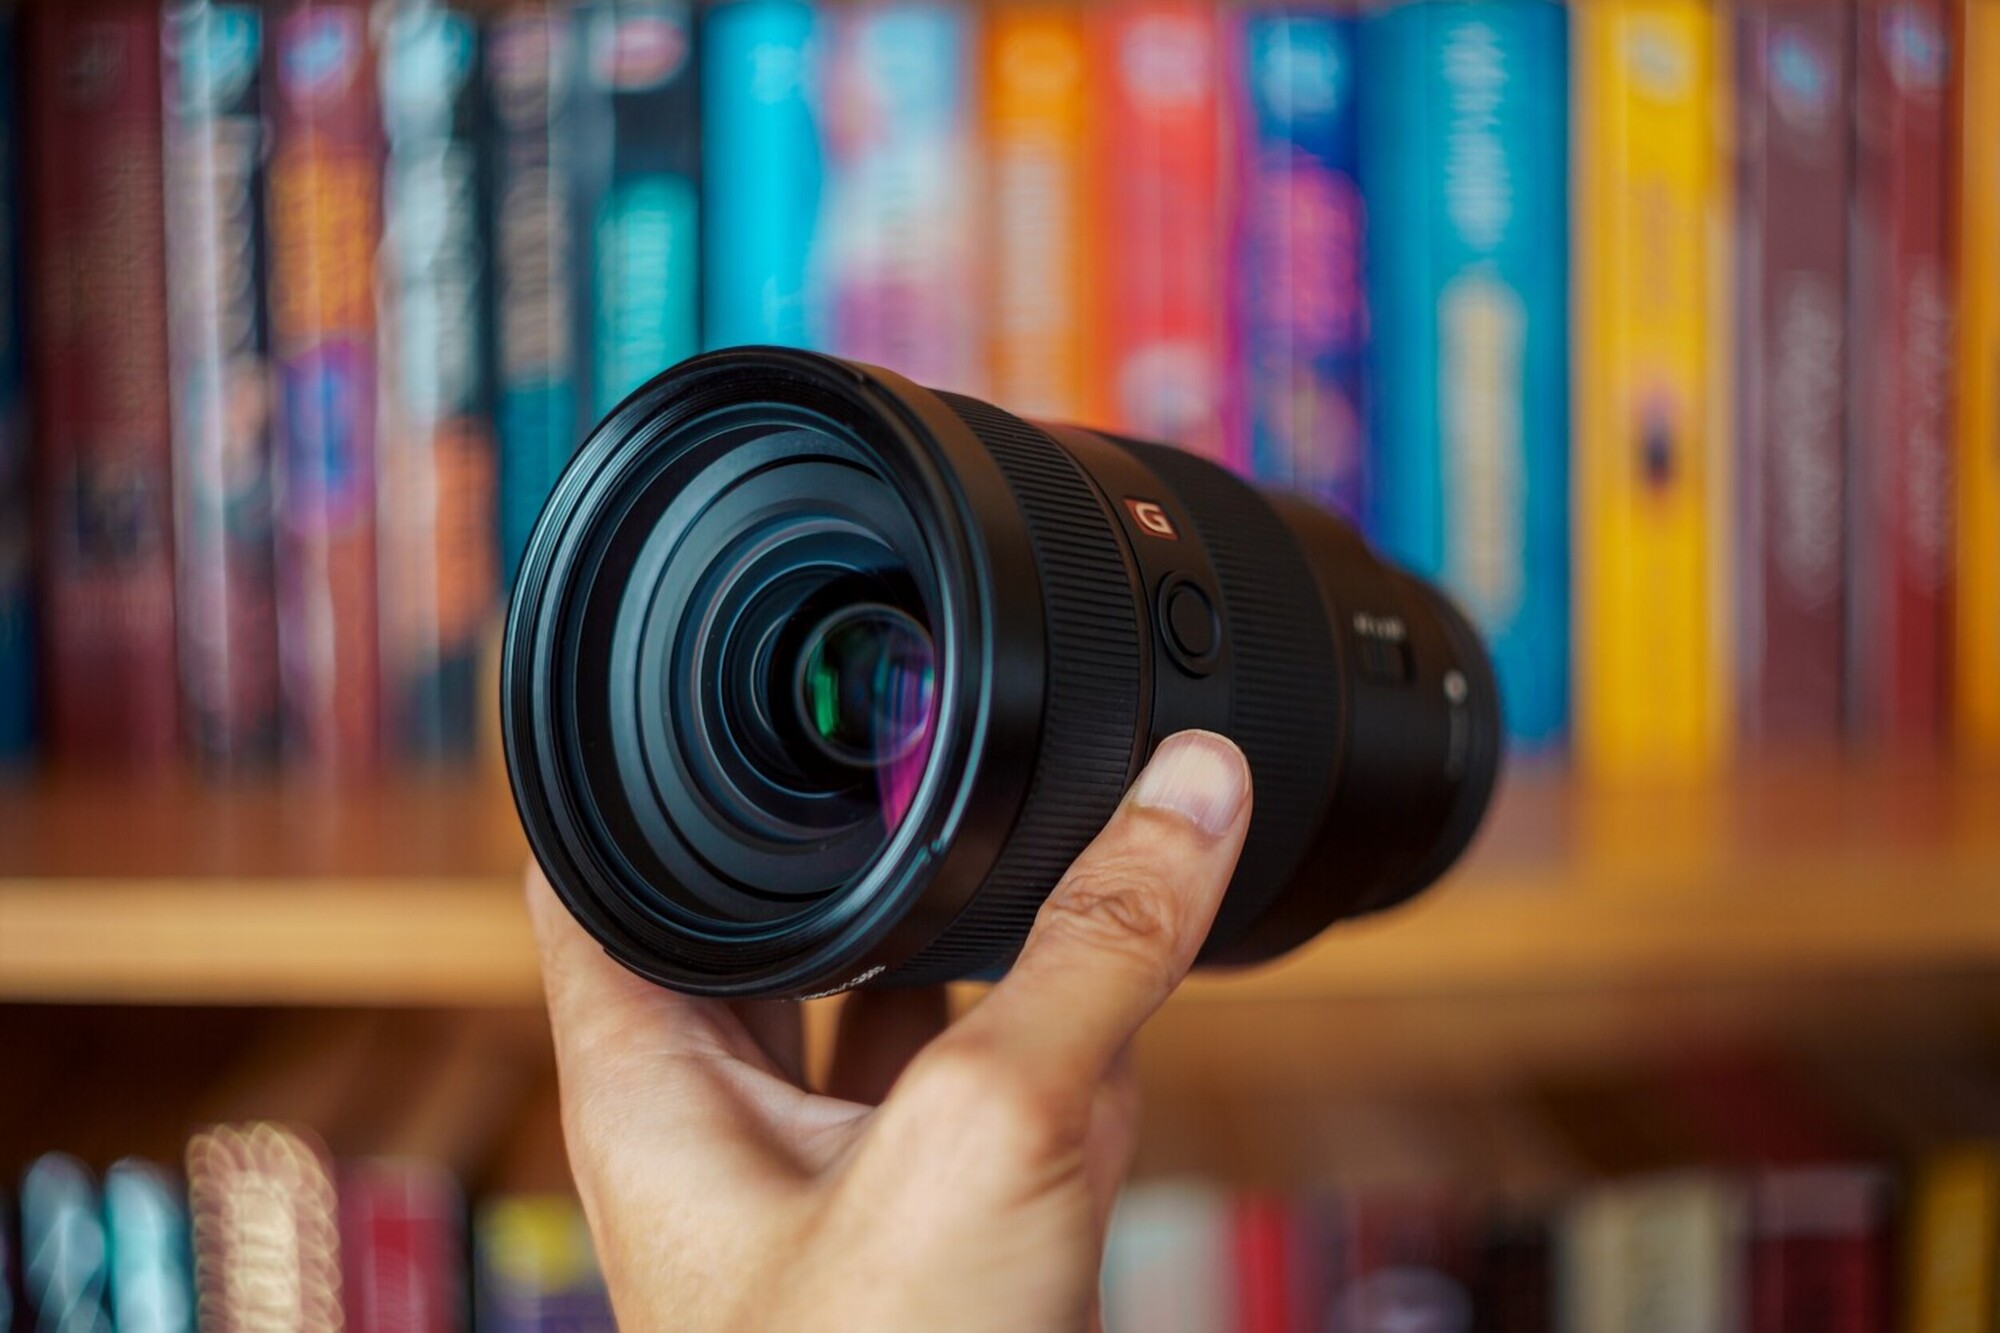 Sony FE 24-70mm f/2.8 GM II - Review / Test Report